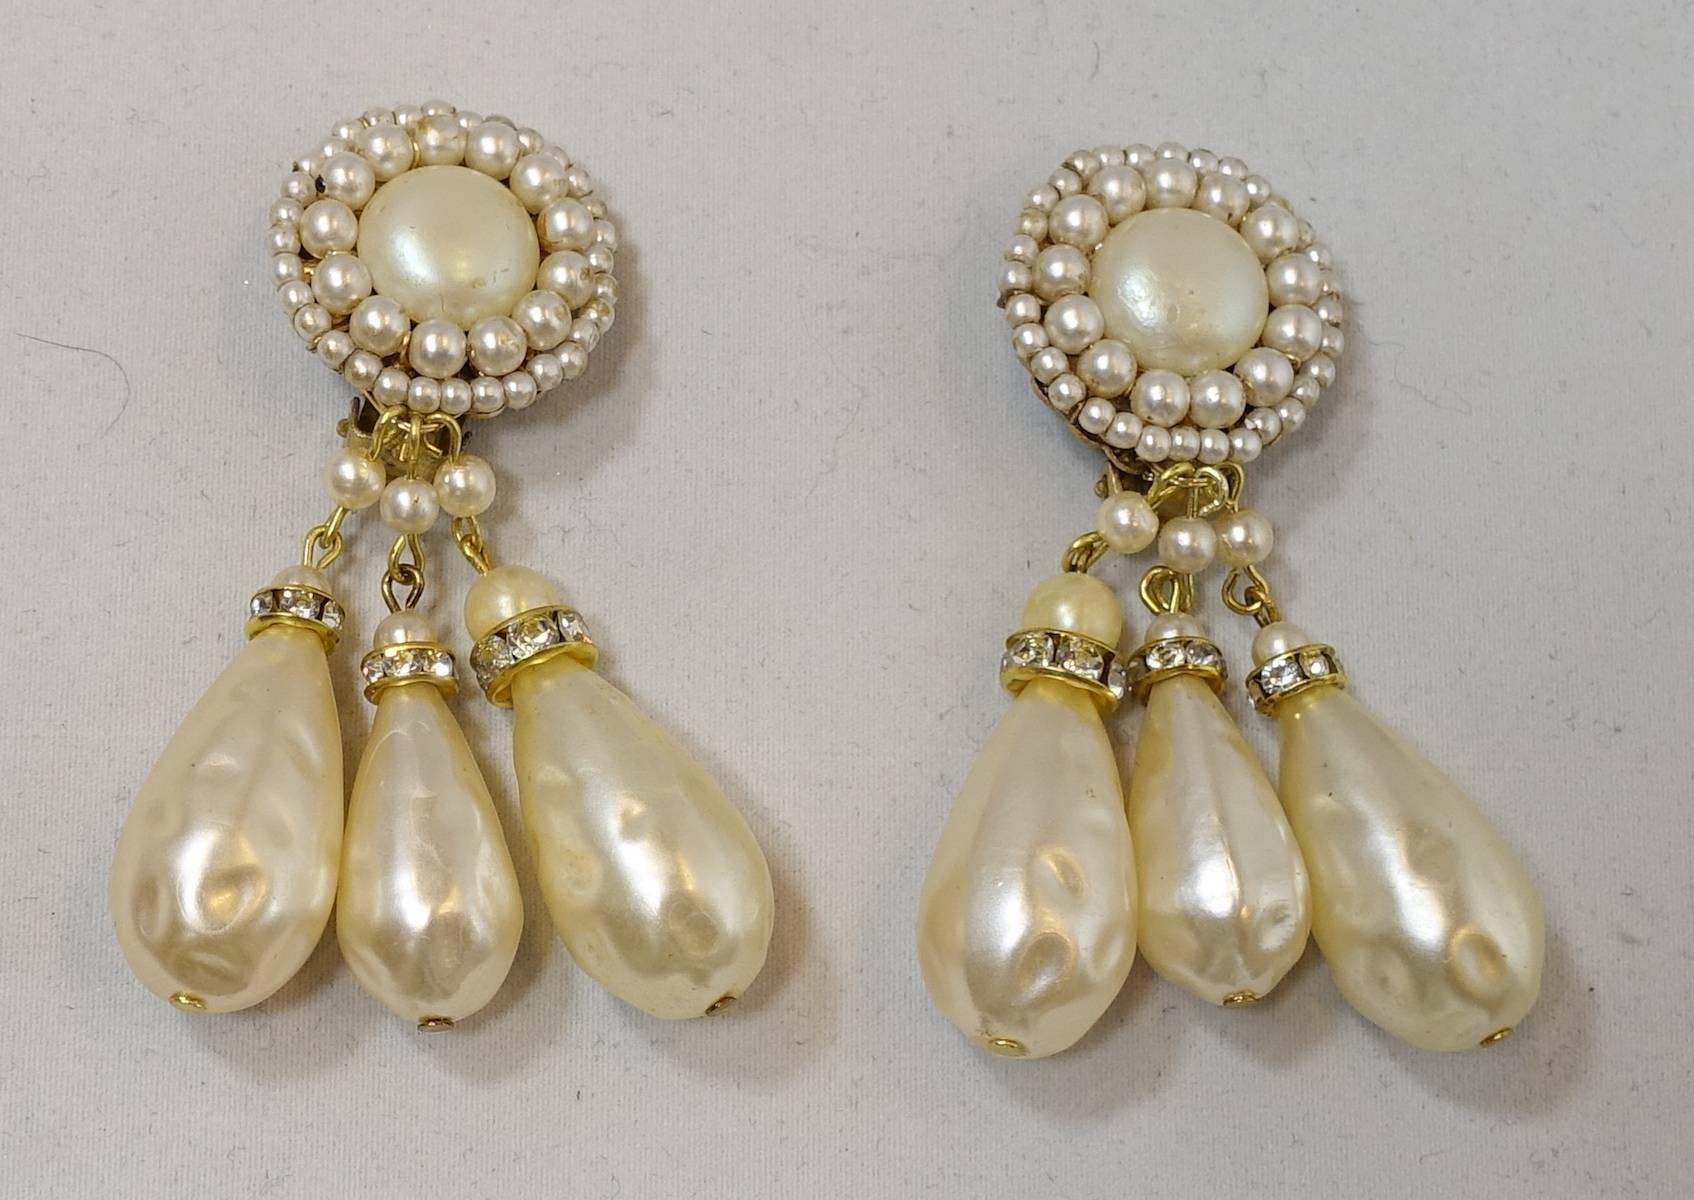 These earrings have a large baroque pearl in the center accented with smaller faux pearls and seed pearls. It has three large pearls that dangle at the bottom with a rose montee bead caps. These clip earrings are in a gold tone setting and measure